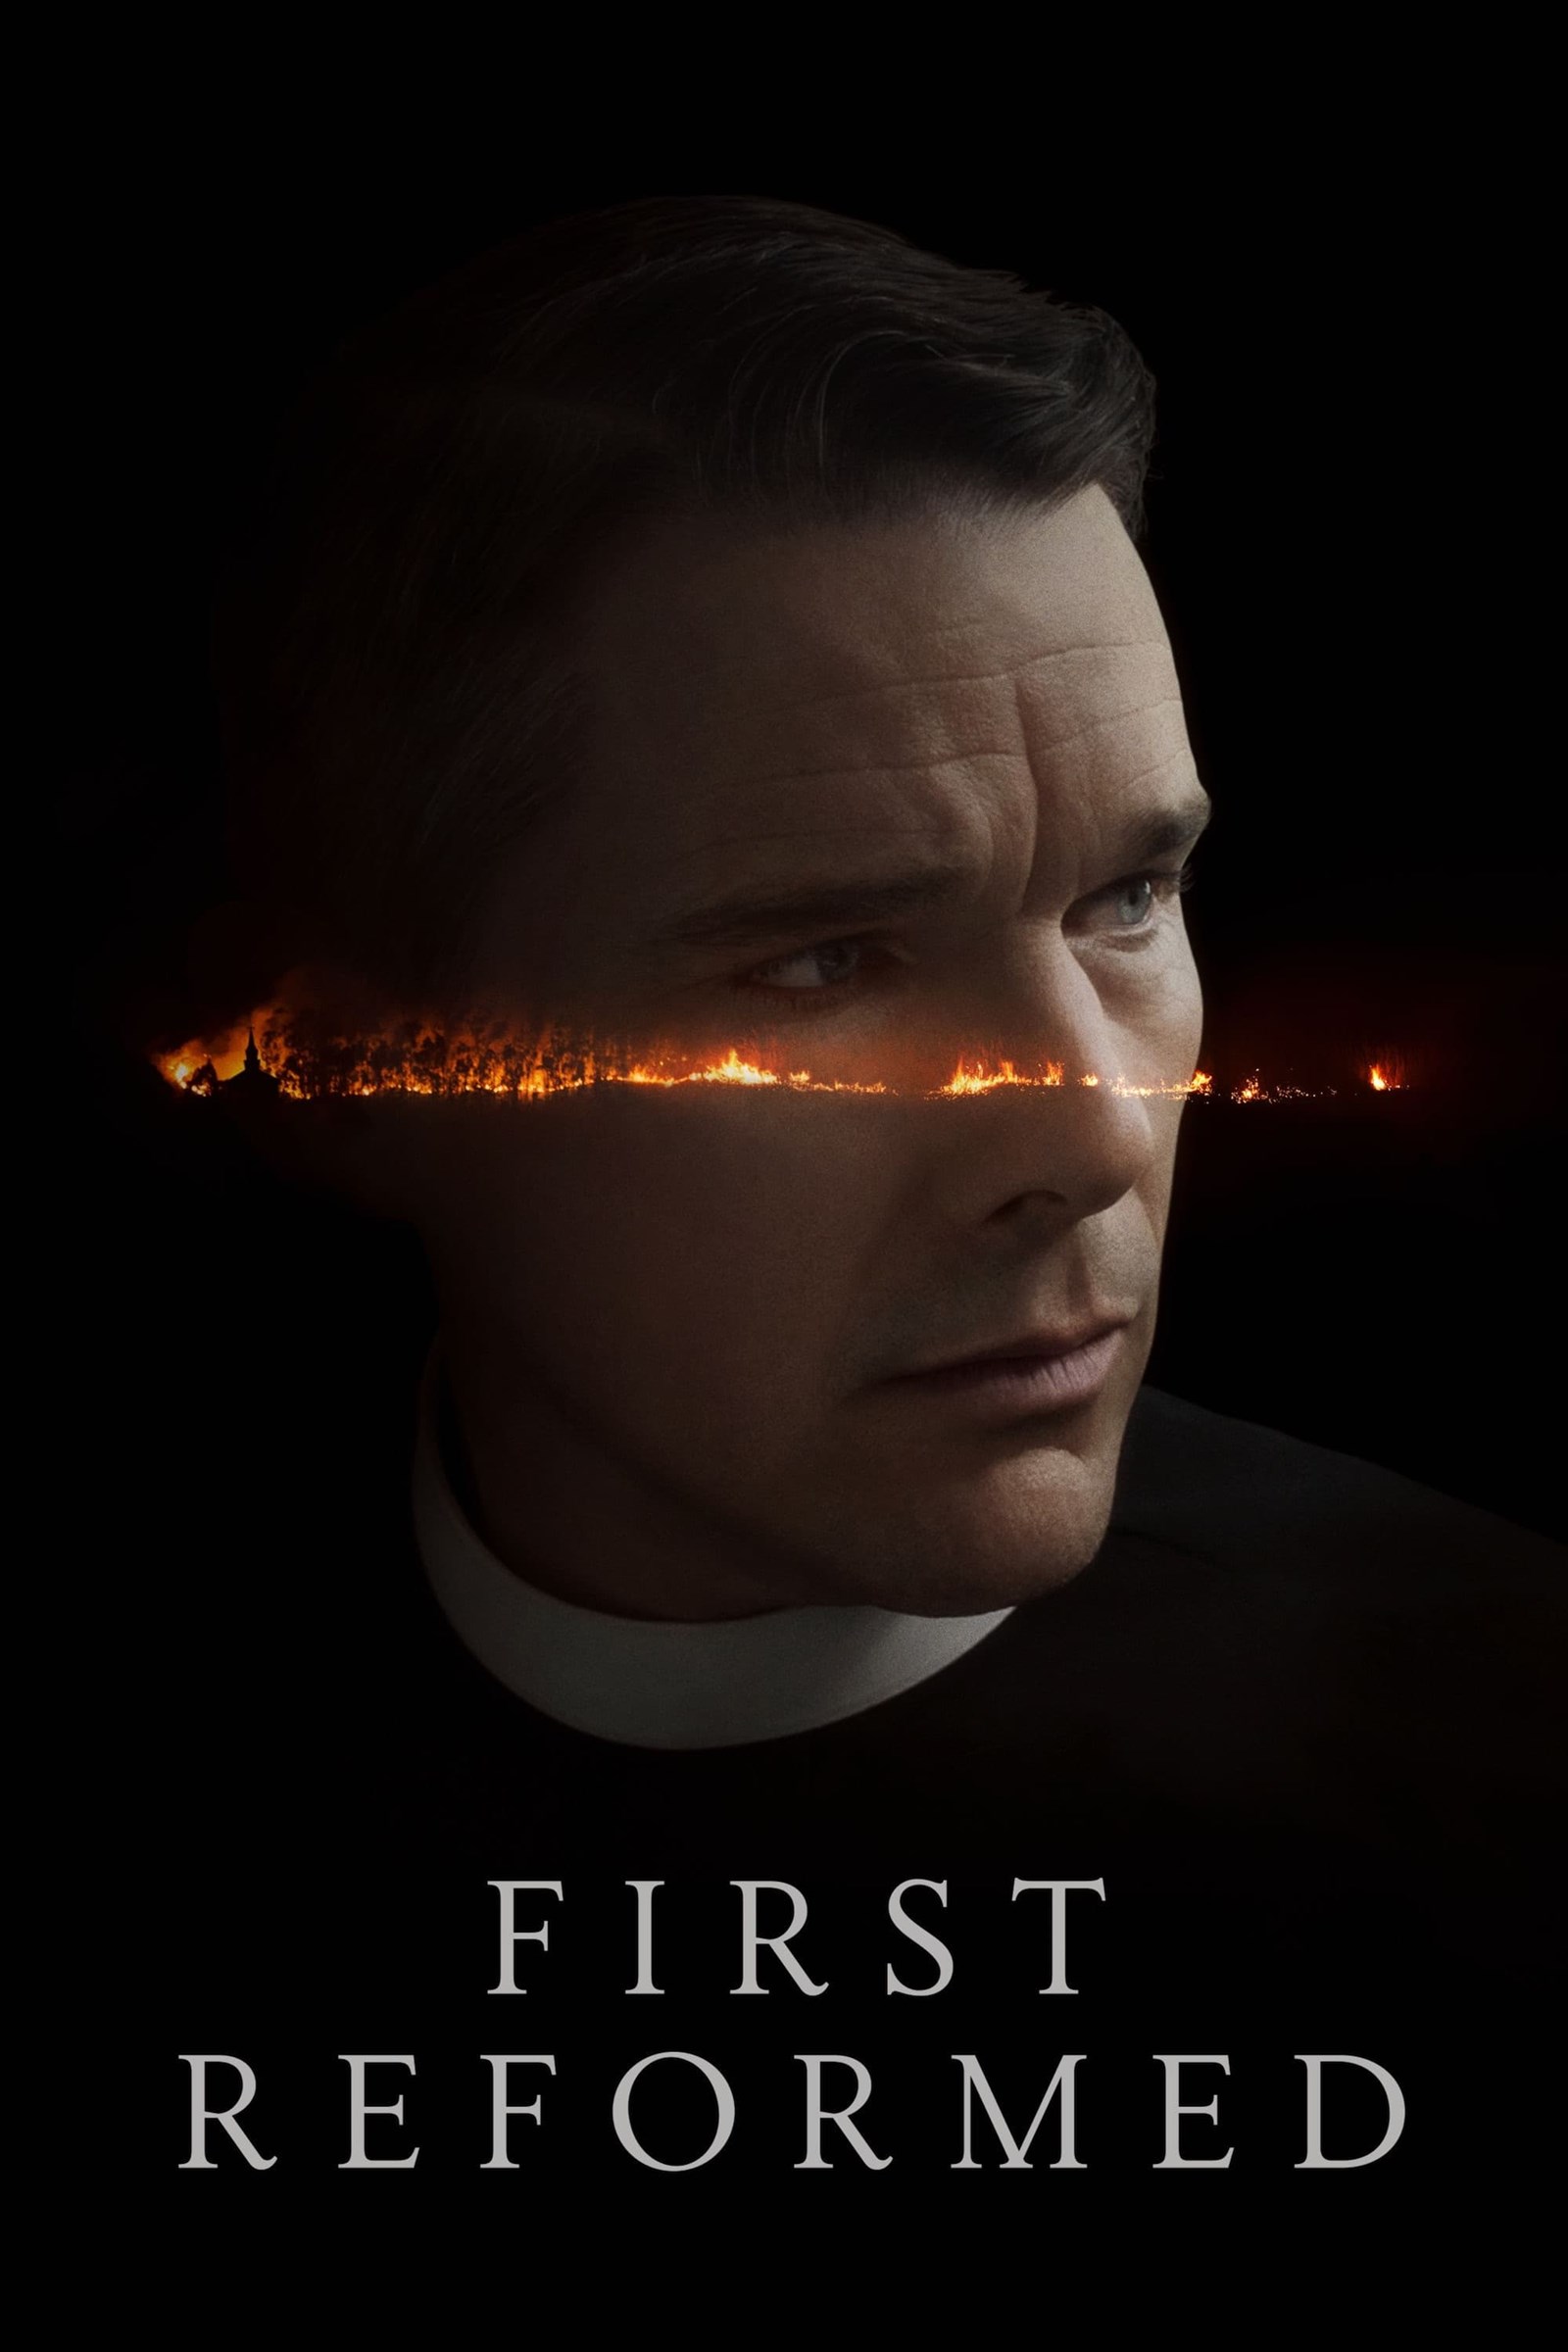 First reformed 2017 4k quality